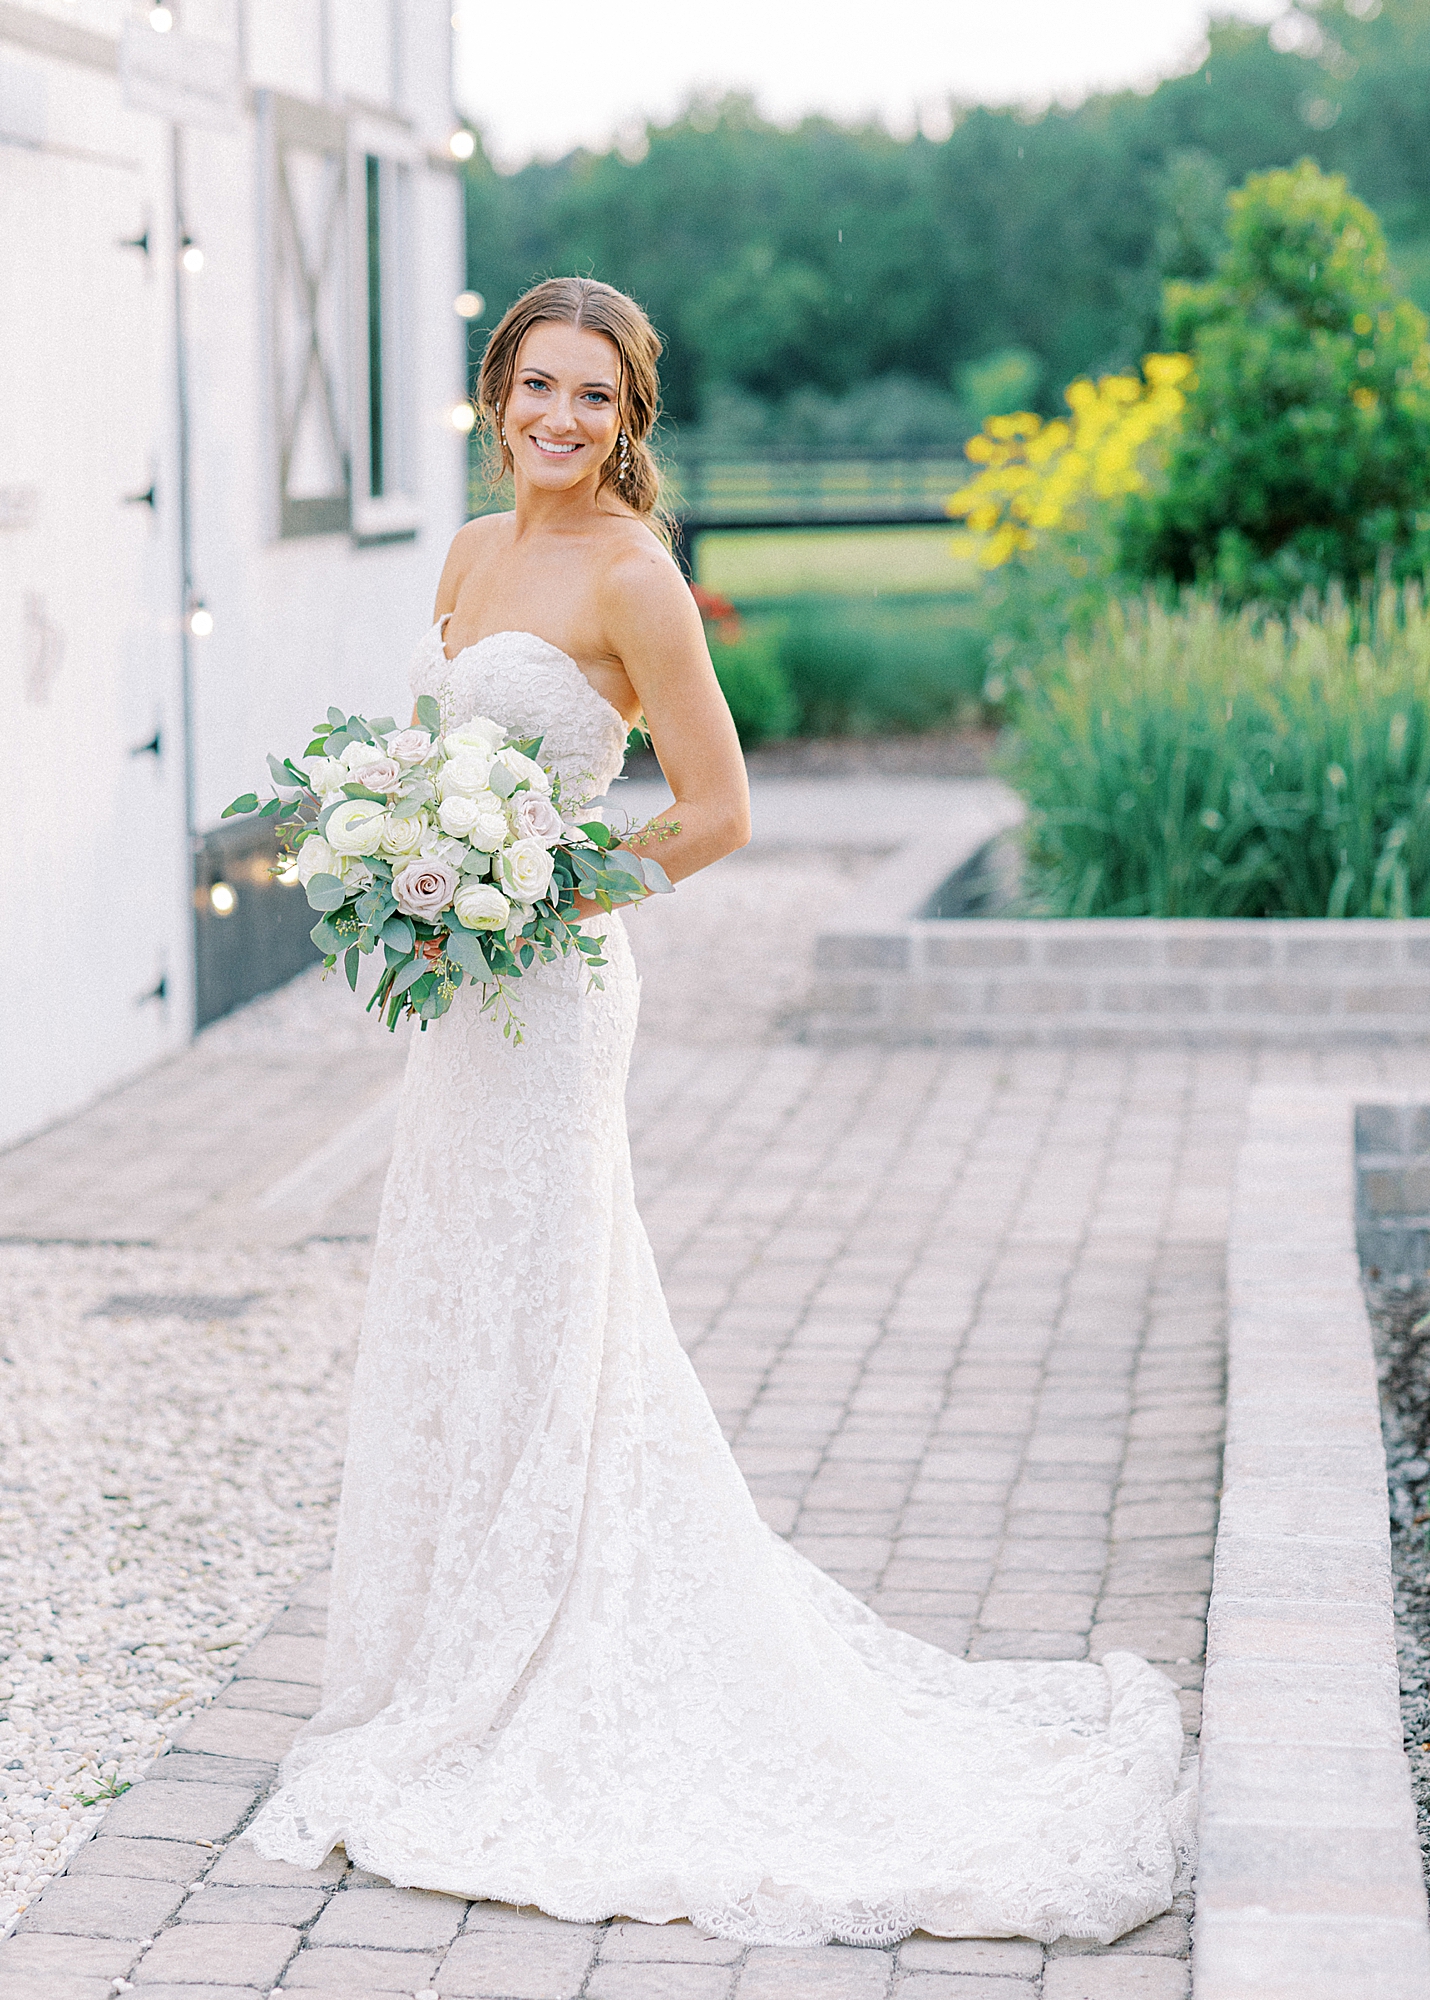 Bride wearing lace strapless wedding dress smiling into the camera holding white and light blush bouquet.